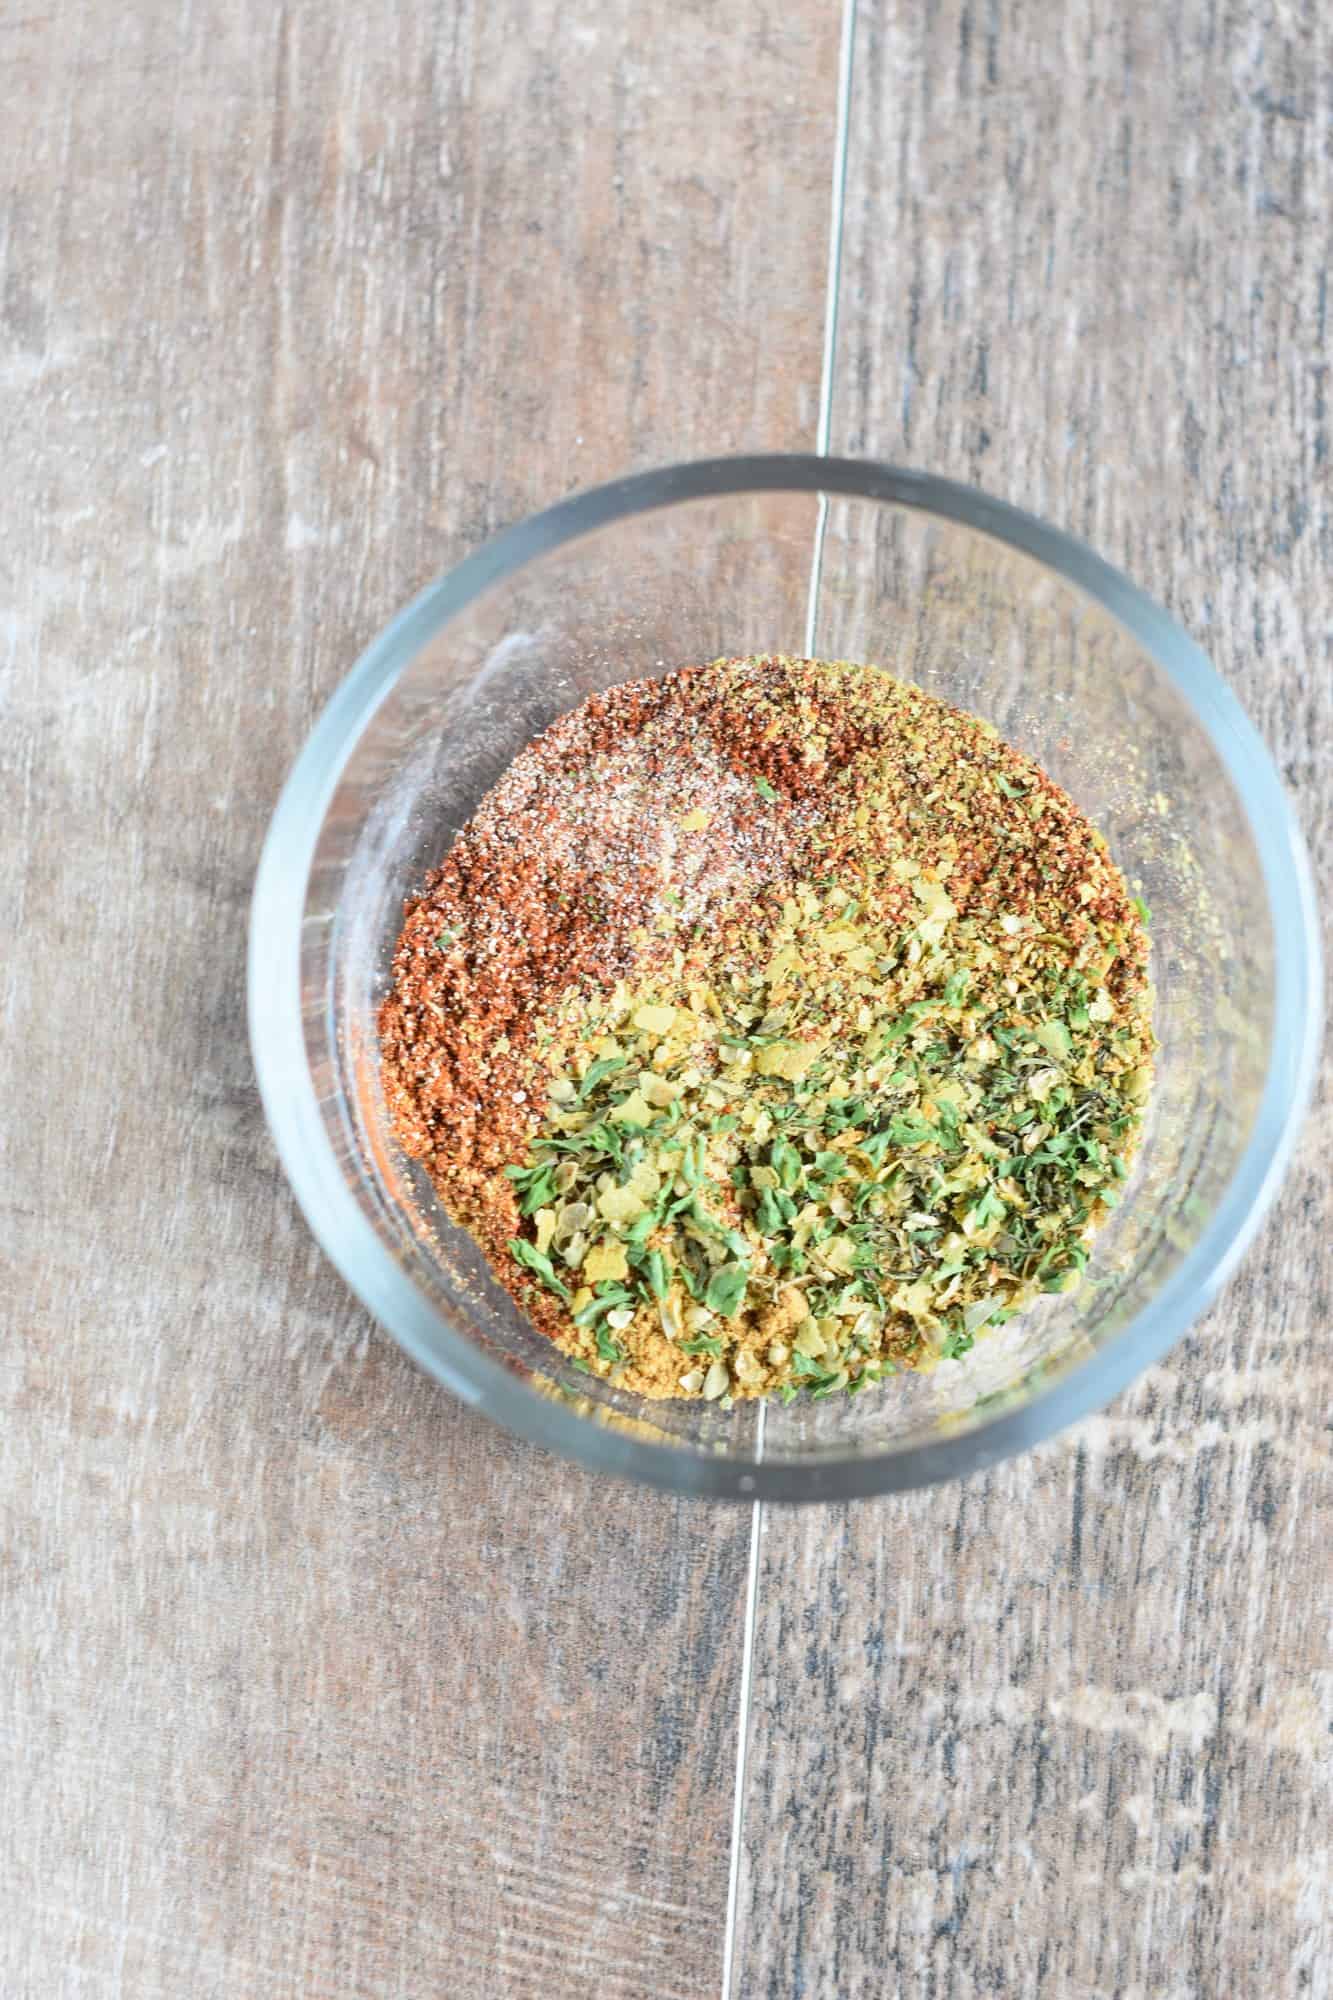 seasonings combined in a small glass bowl